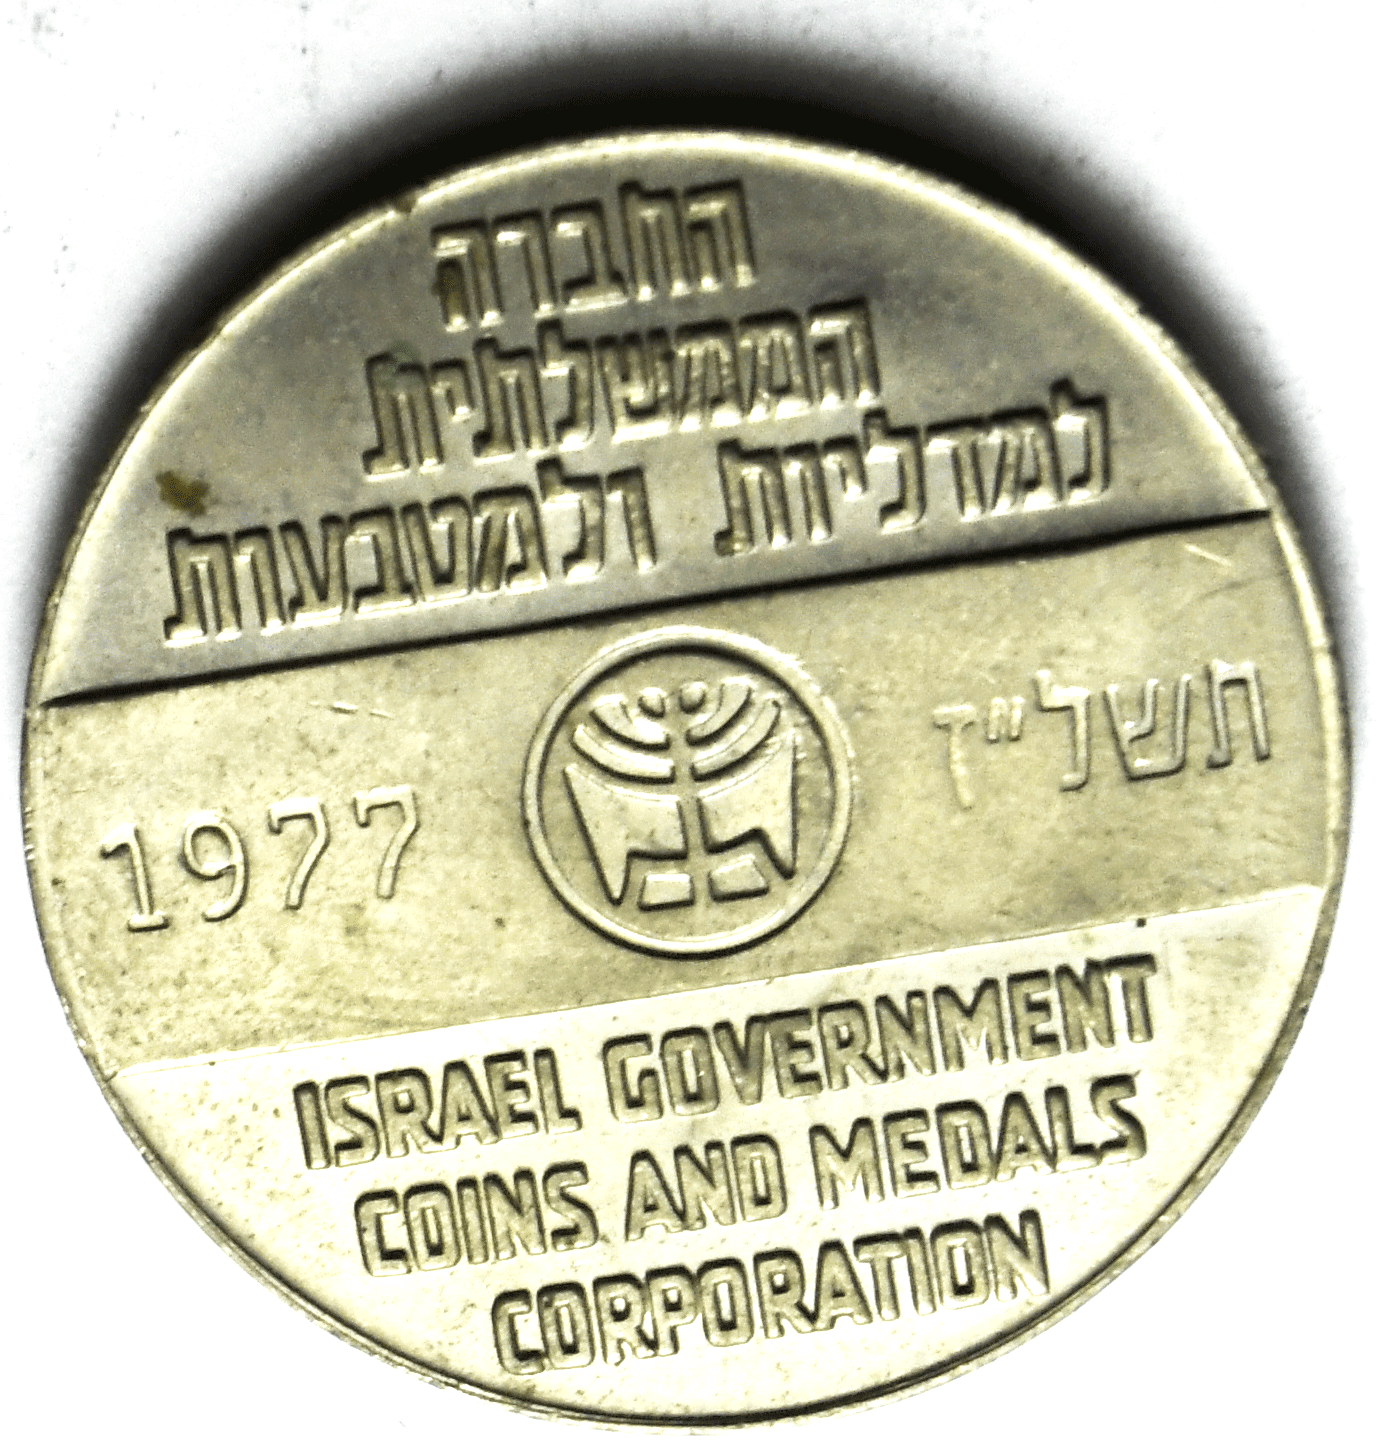 1977 Israel Government Coins & Medals Corp Greetings From Israel Coin